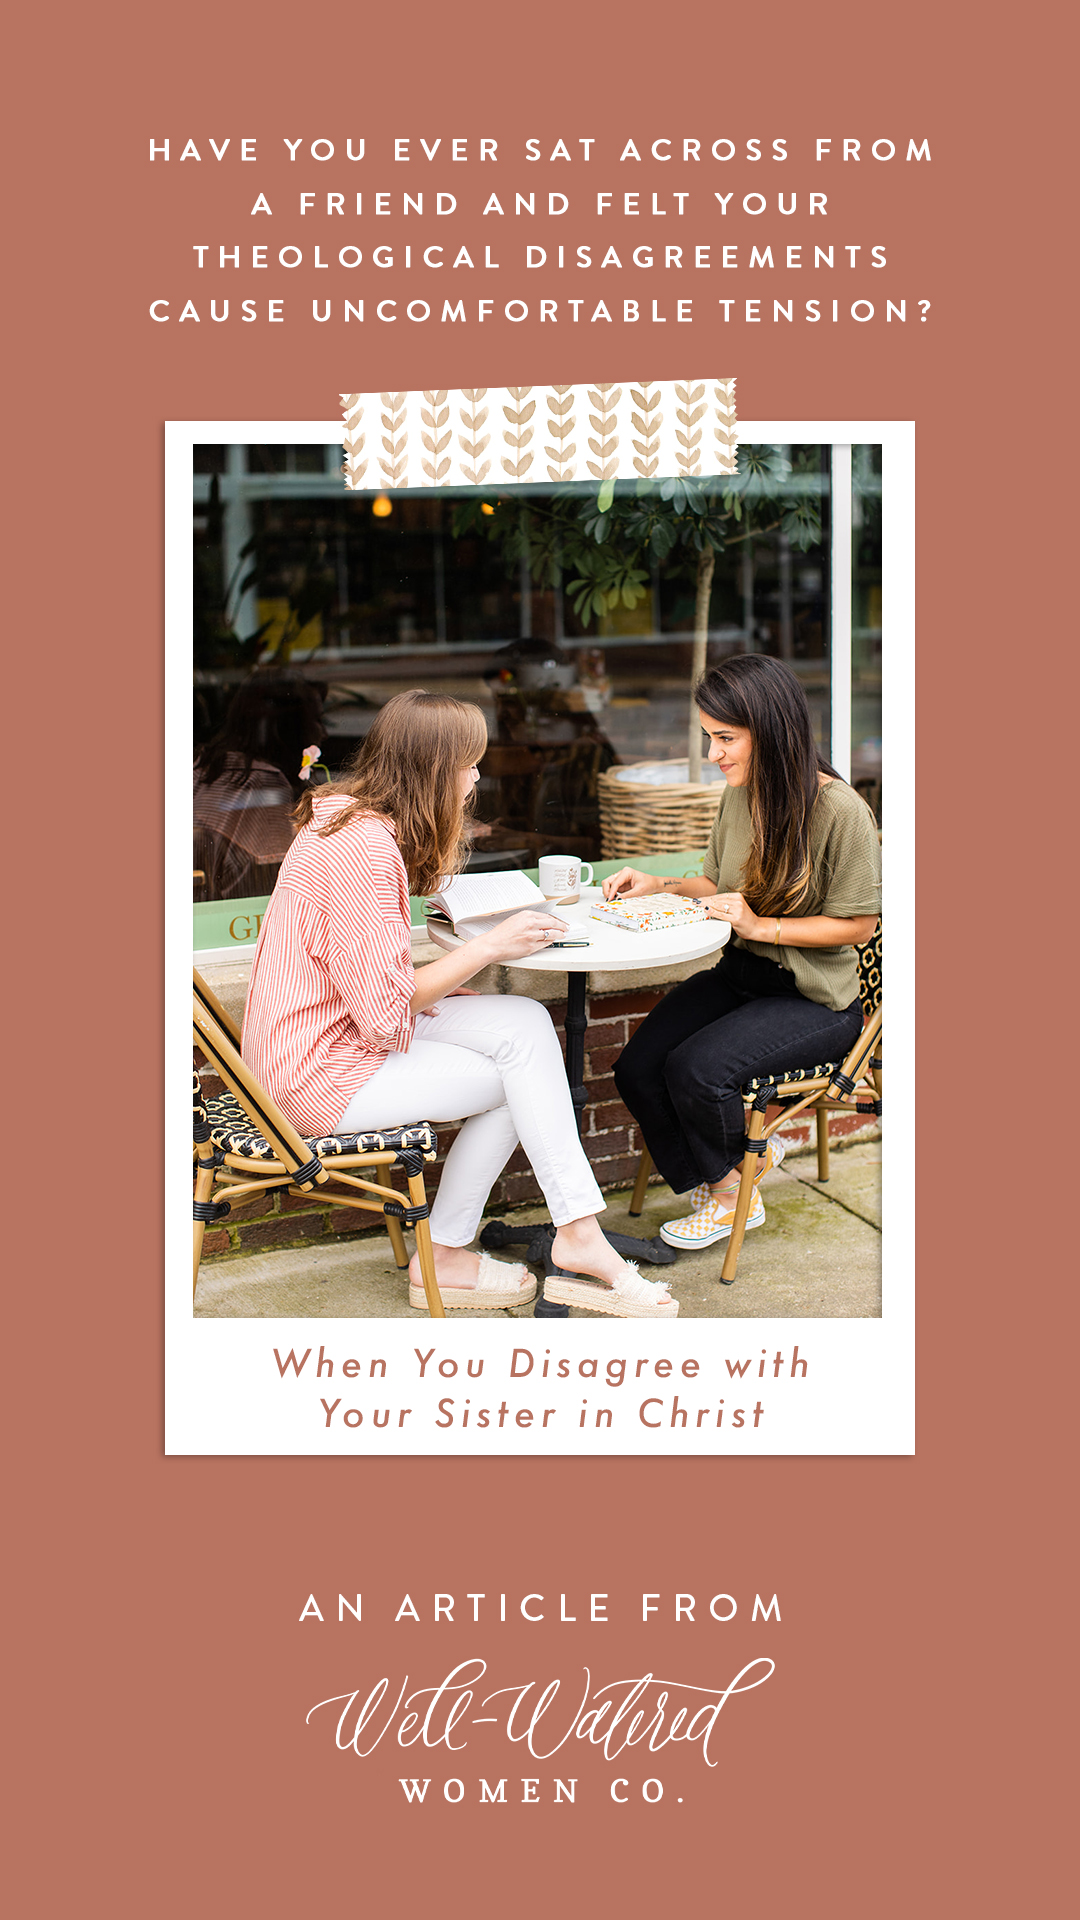 What To Do When You Disagree with a Sister in Christ - An Article by Well-Watered Women